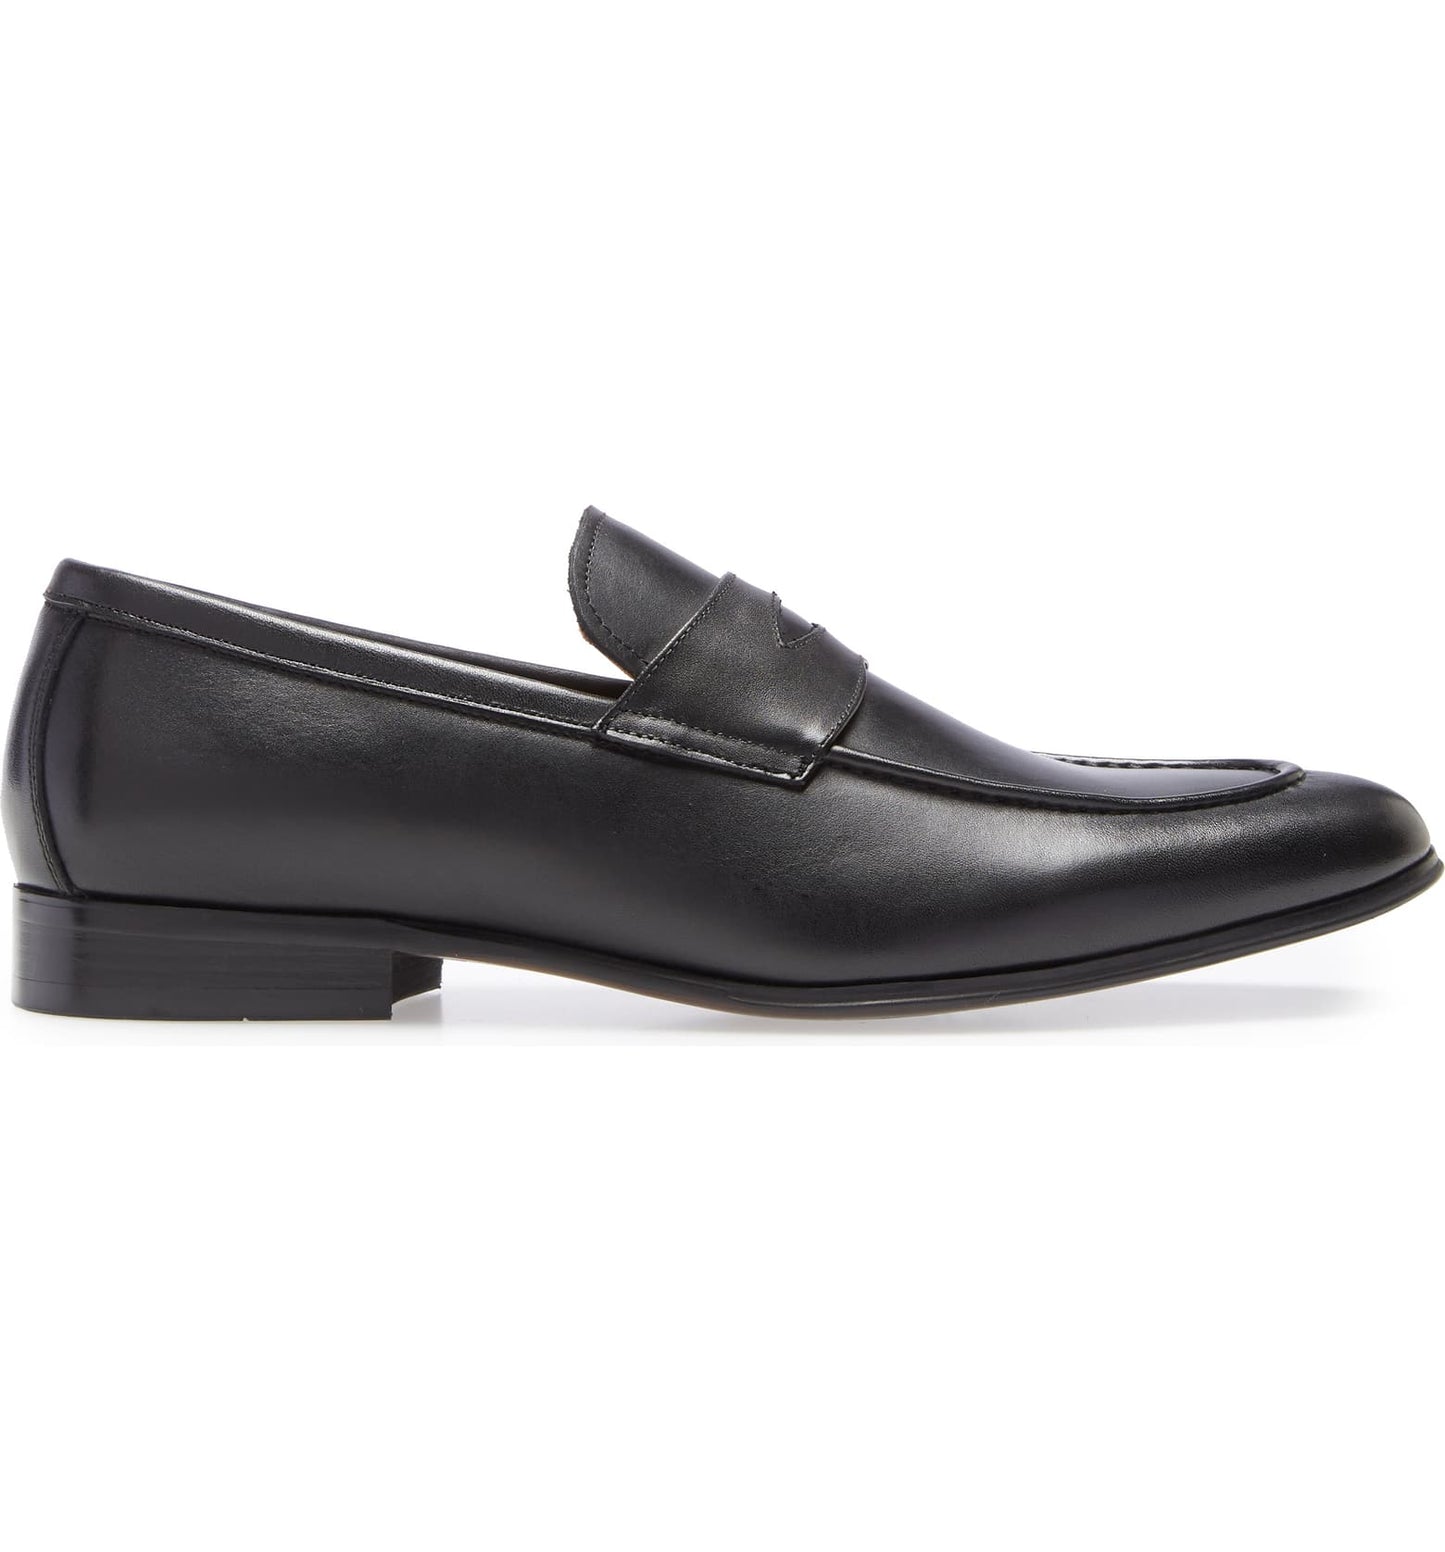 Trey Classic Loafer